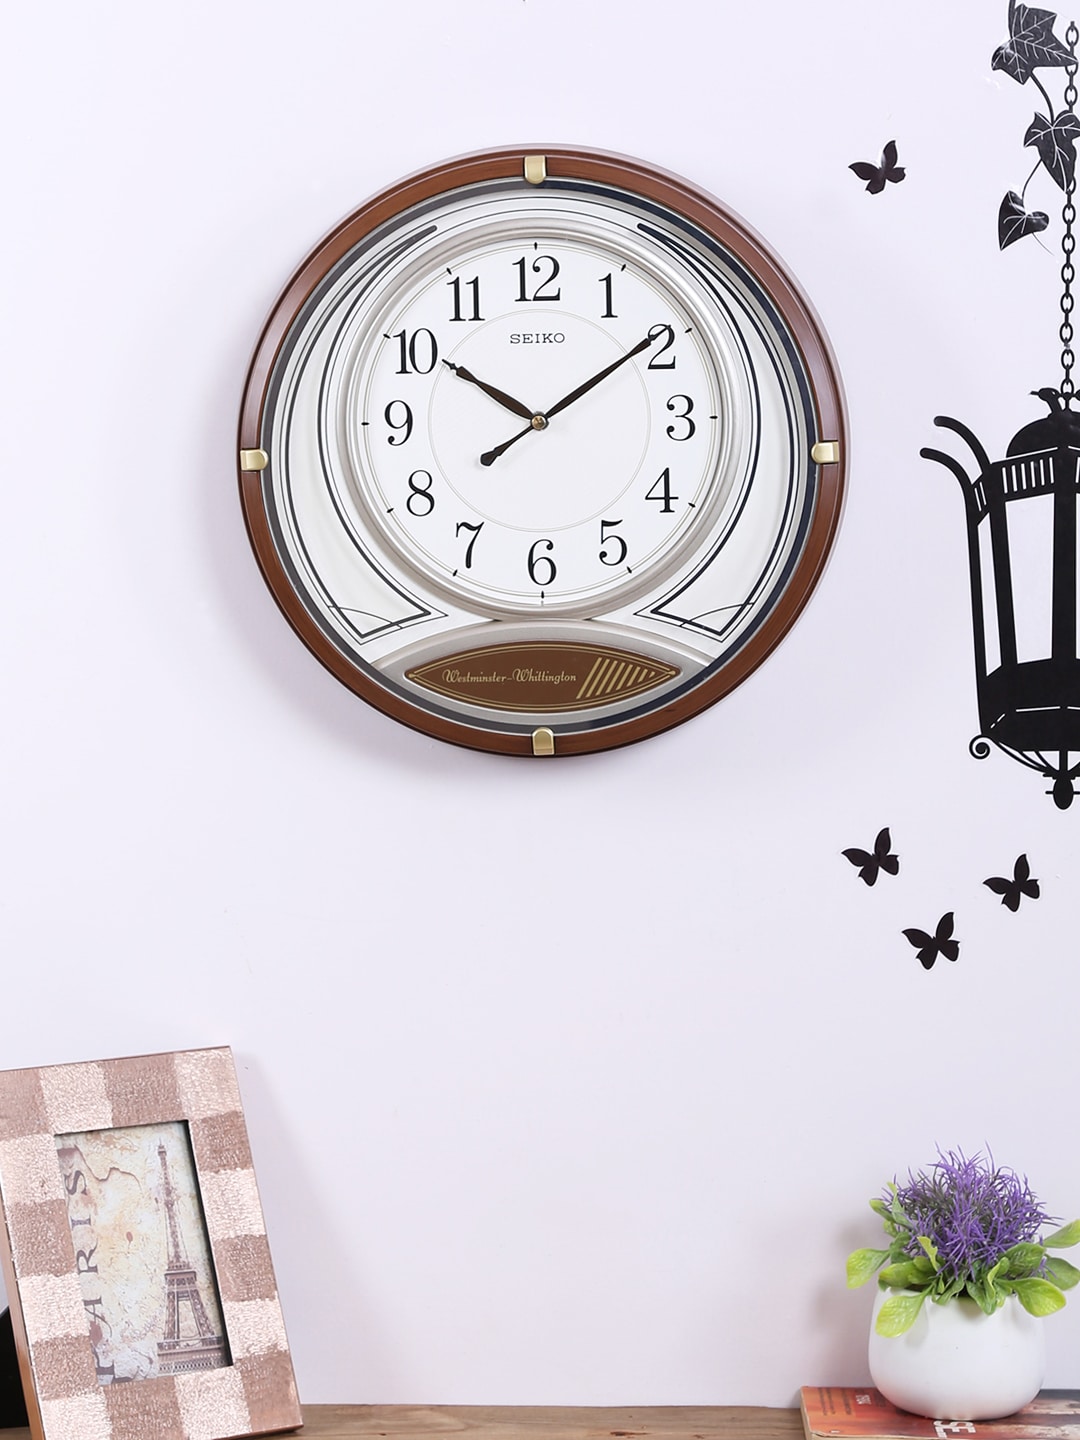 SEIKO White Round Solid Analogue Wall Clock Price in India